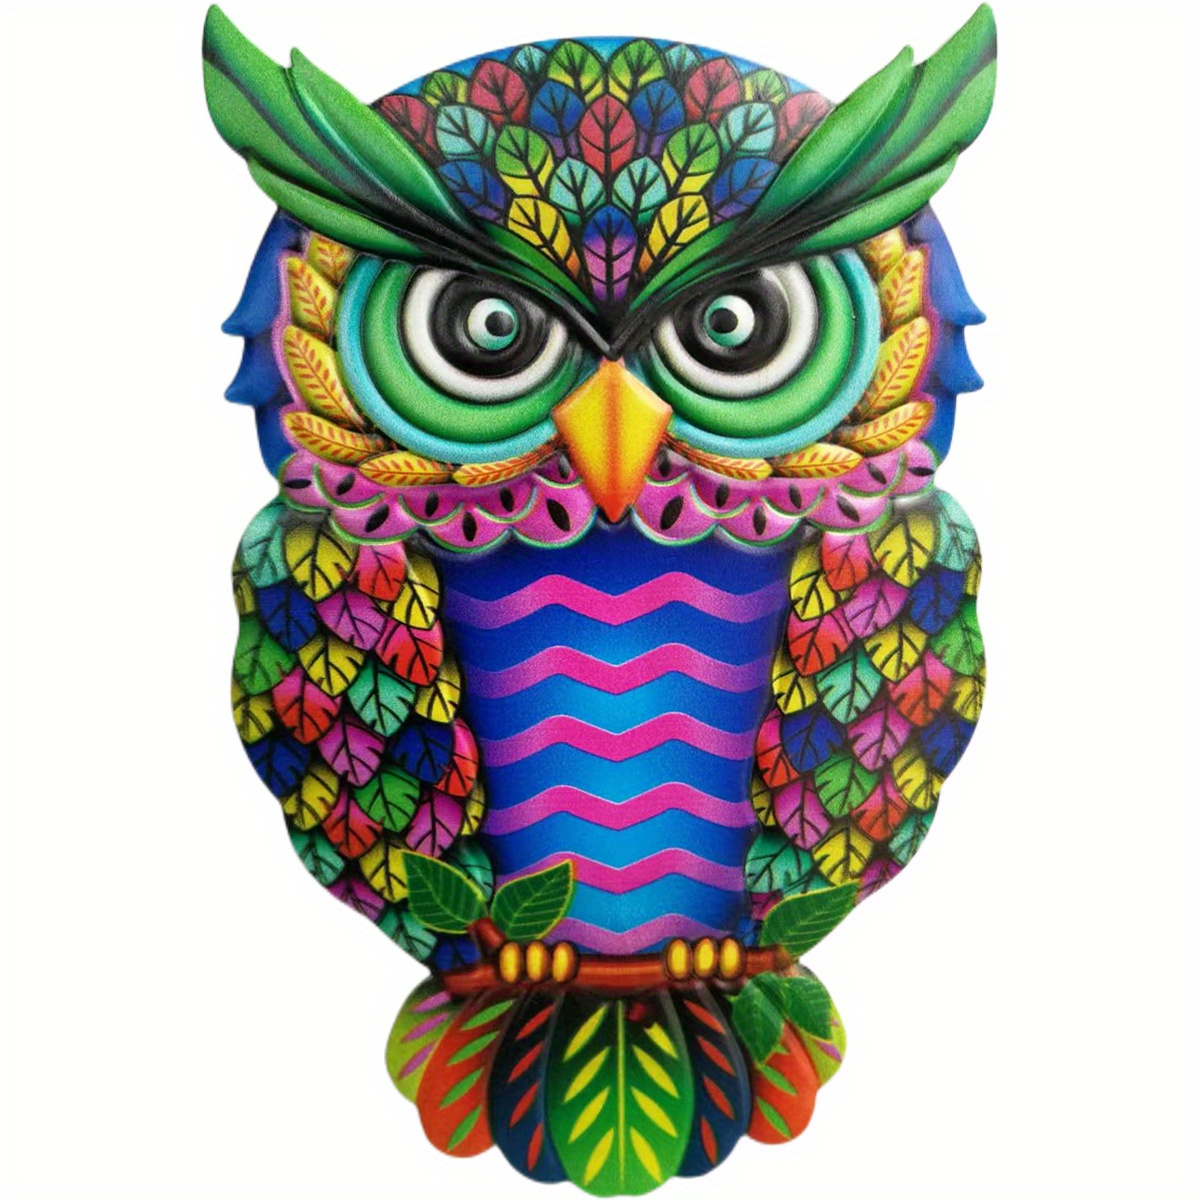 Dropship 1pc Metal Owl Wall Decor, Outside Garden Decoration, Yard Art  Outdoor Patio Fence Lawn Ornament, Home Decor, Room Decor, Party Supplies,  Birthday Gift, Holiday Decor to Sell Online at a Lower